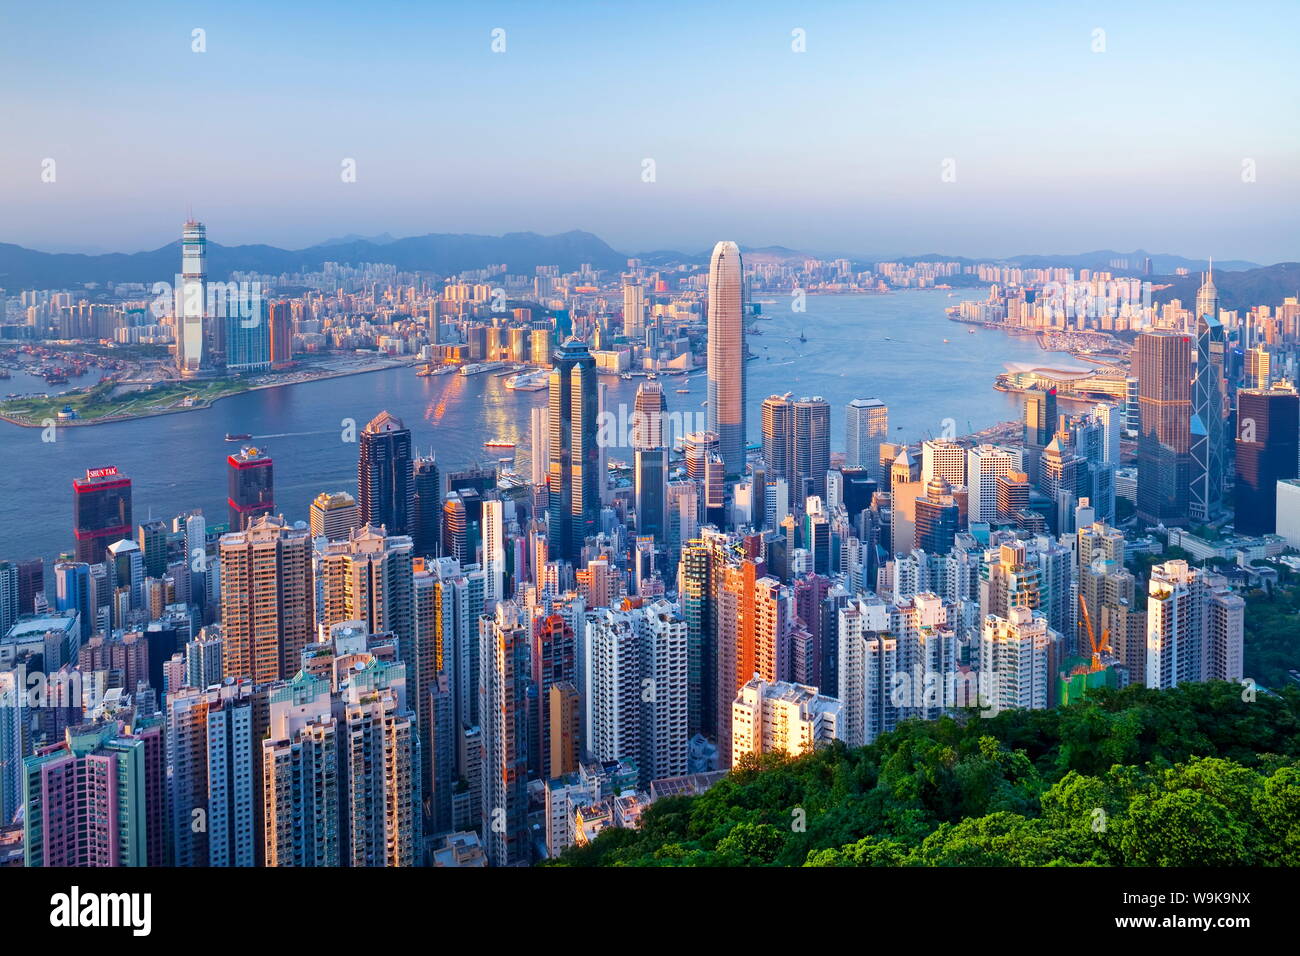 City skyline and Victoria Harbour from Victoria Peak, Hong Kong, China, Asia Stock Photo